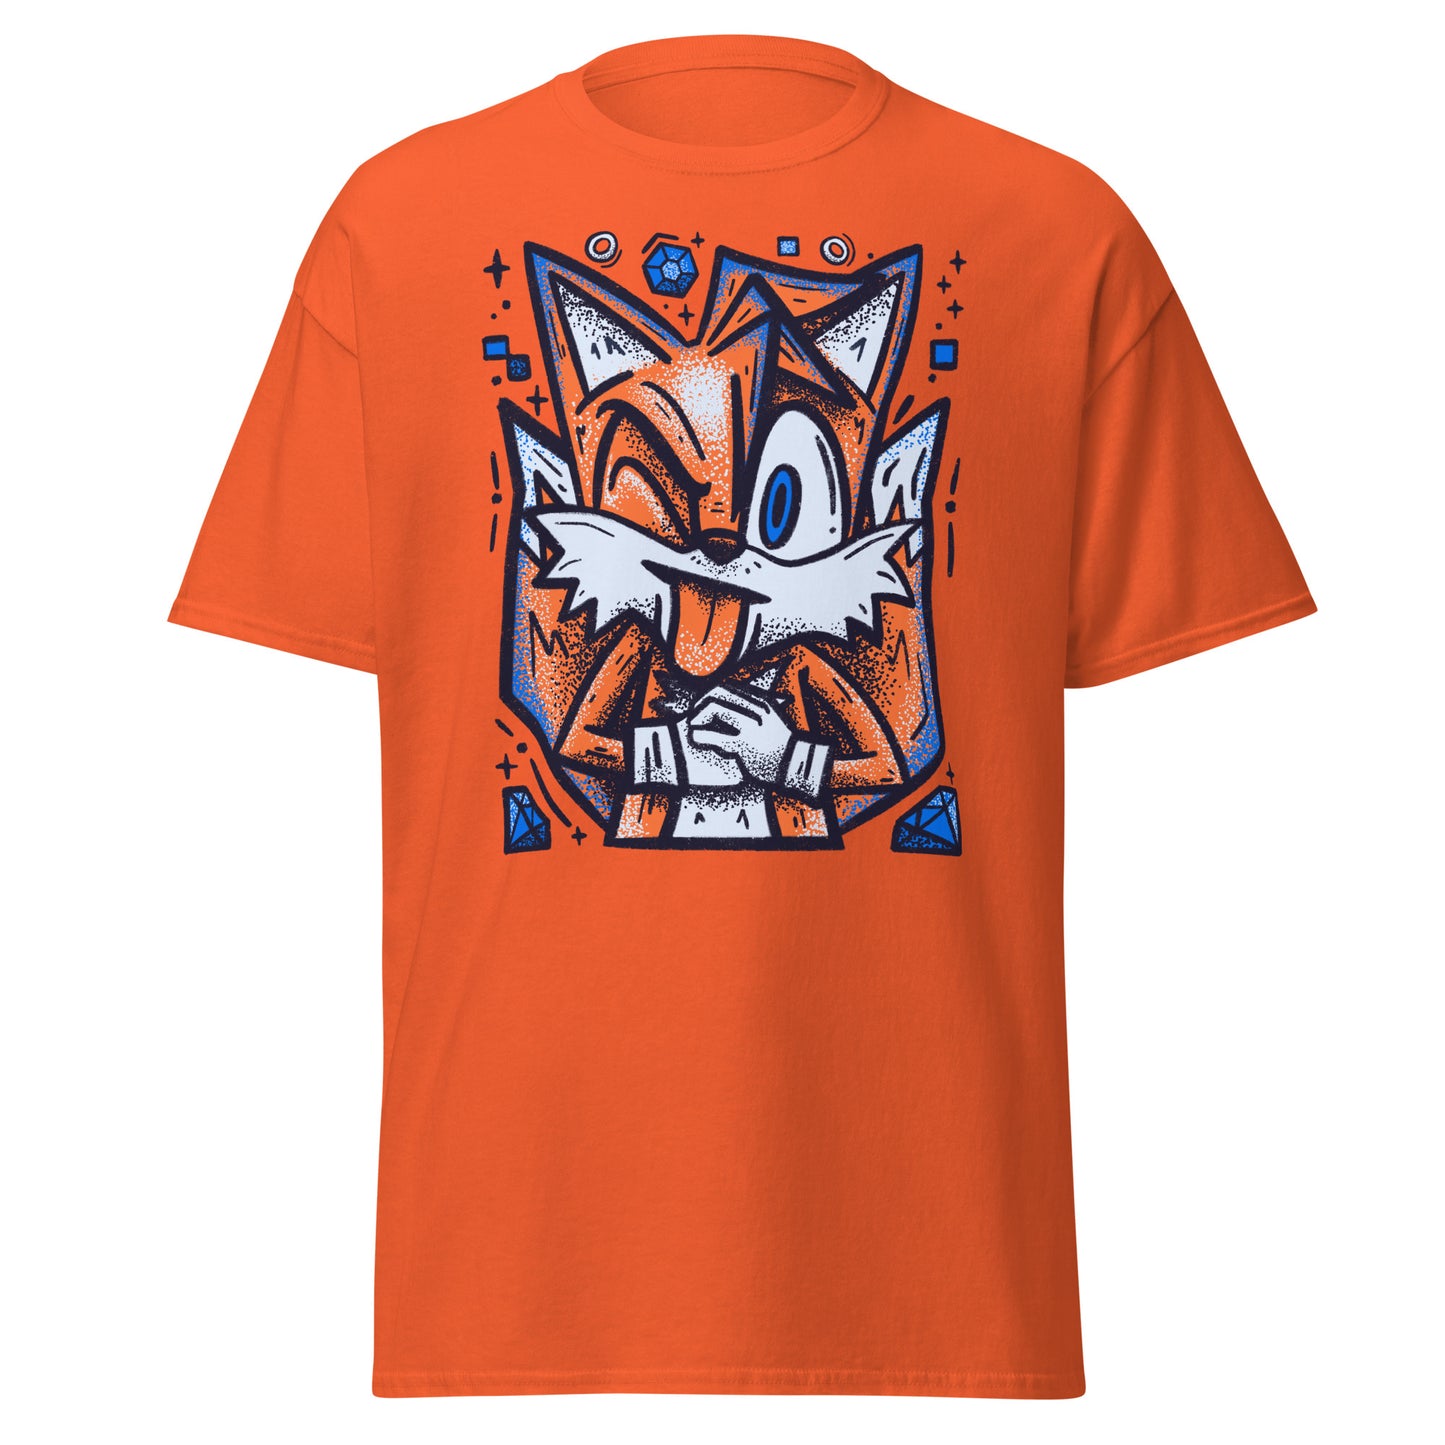 Tails from Sonic The Hedgehog Gritty Portrait T-Shirt